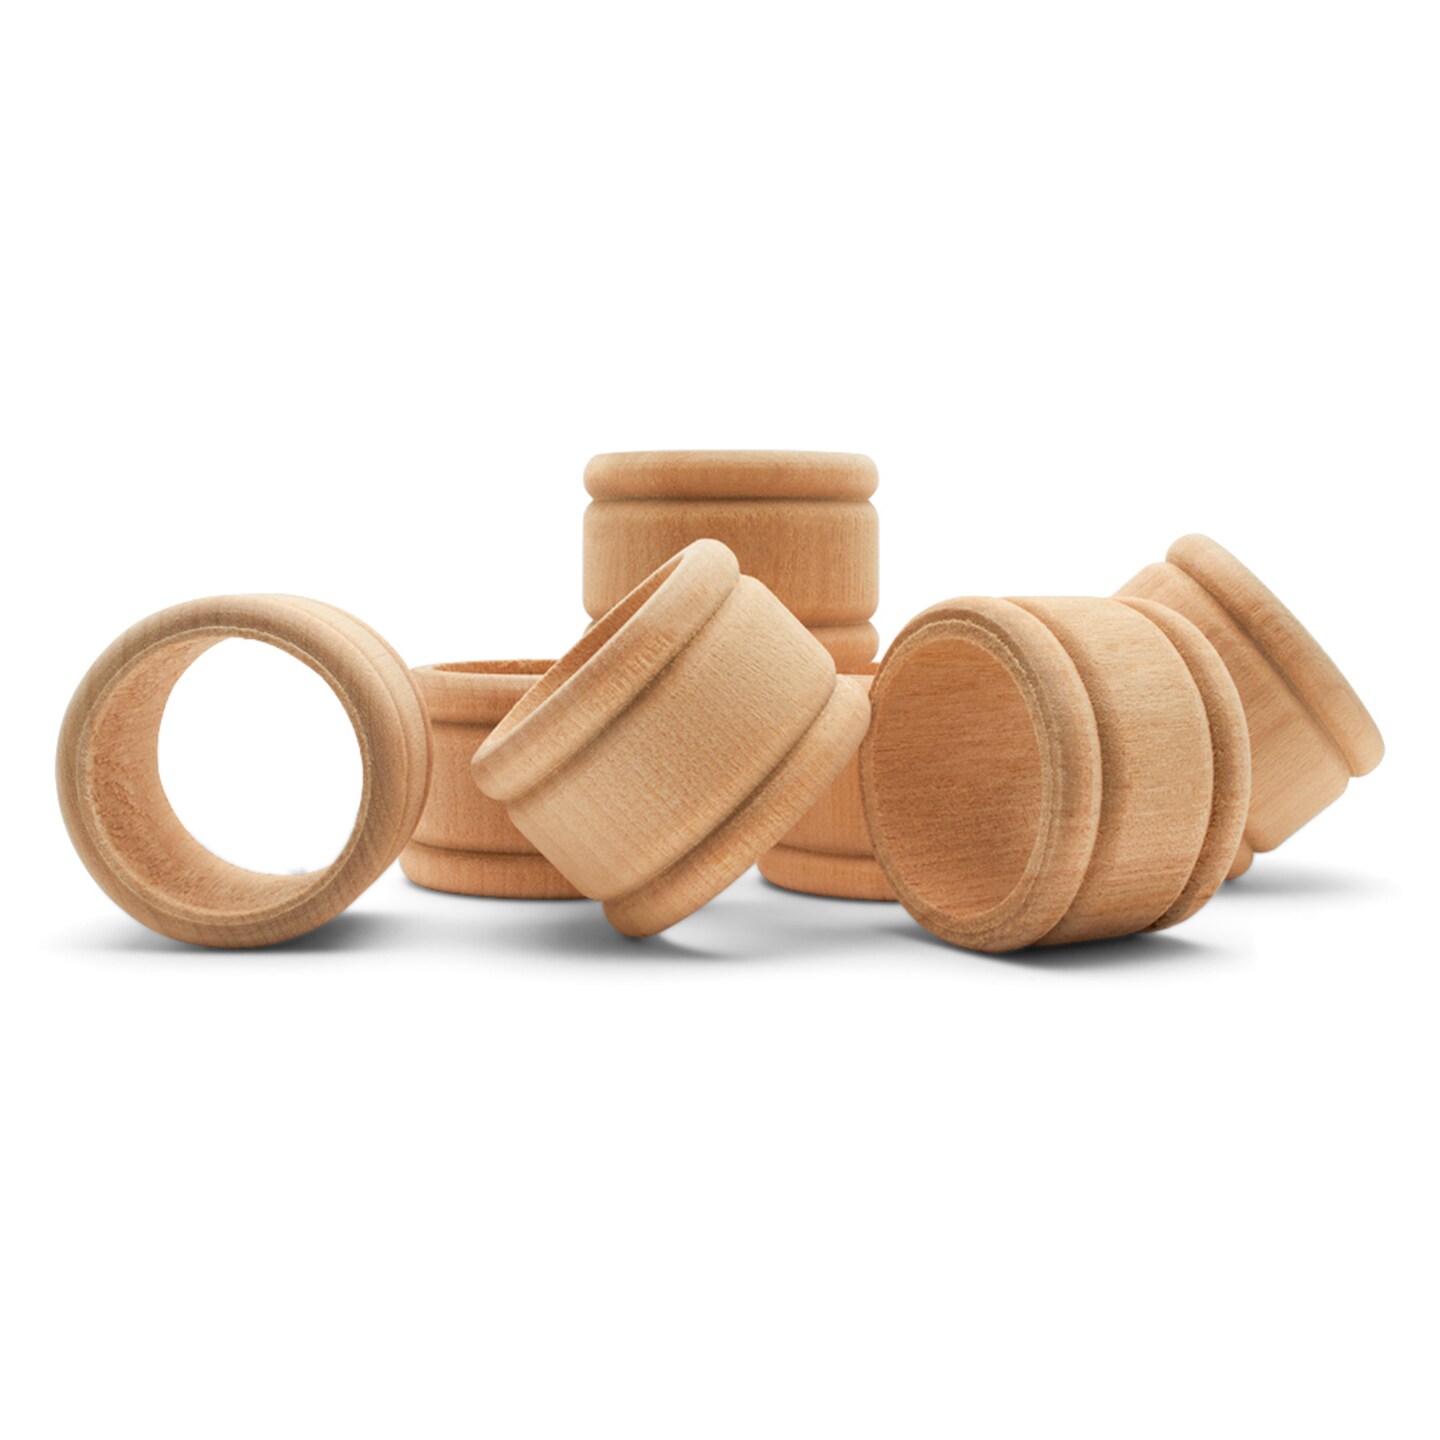 Get Wood With Cream Resin Napkin Ring - Set Of 4 at ₹ 399 | LBB Shop